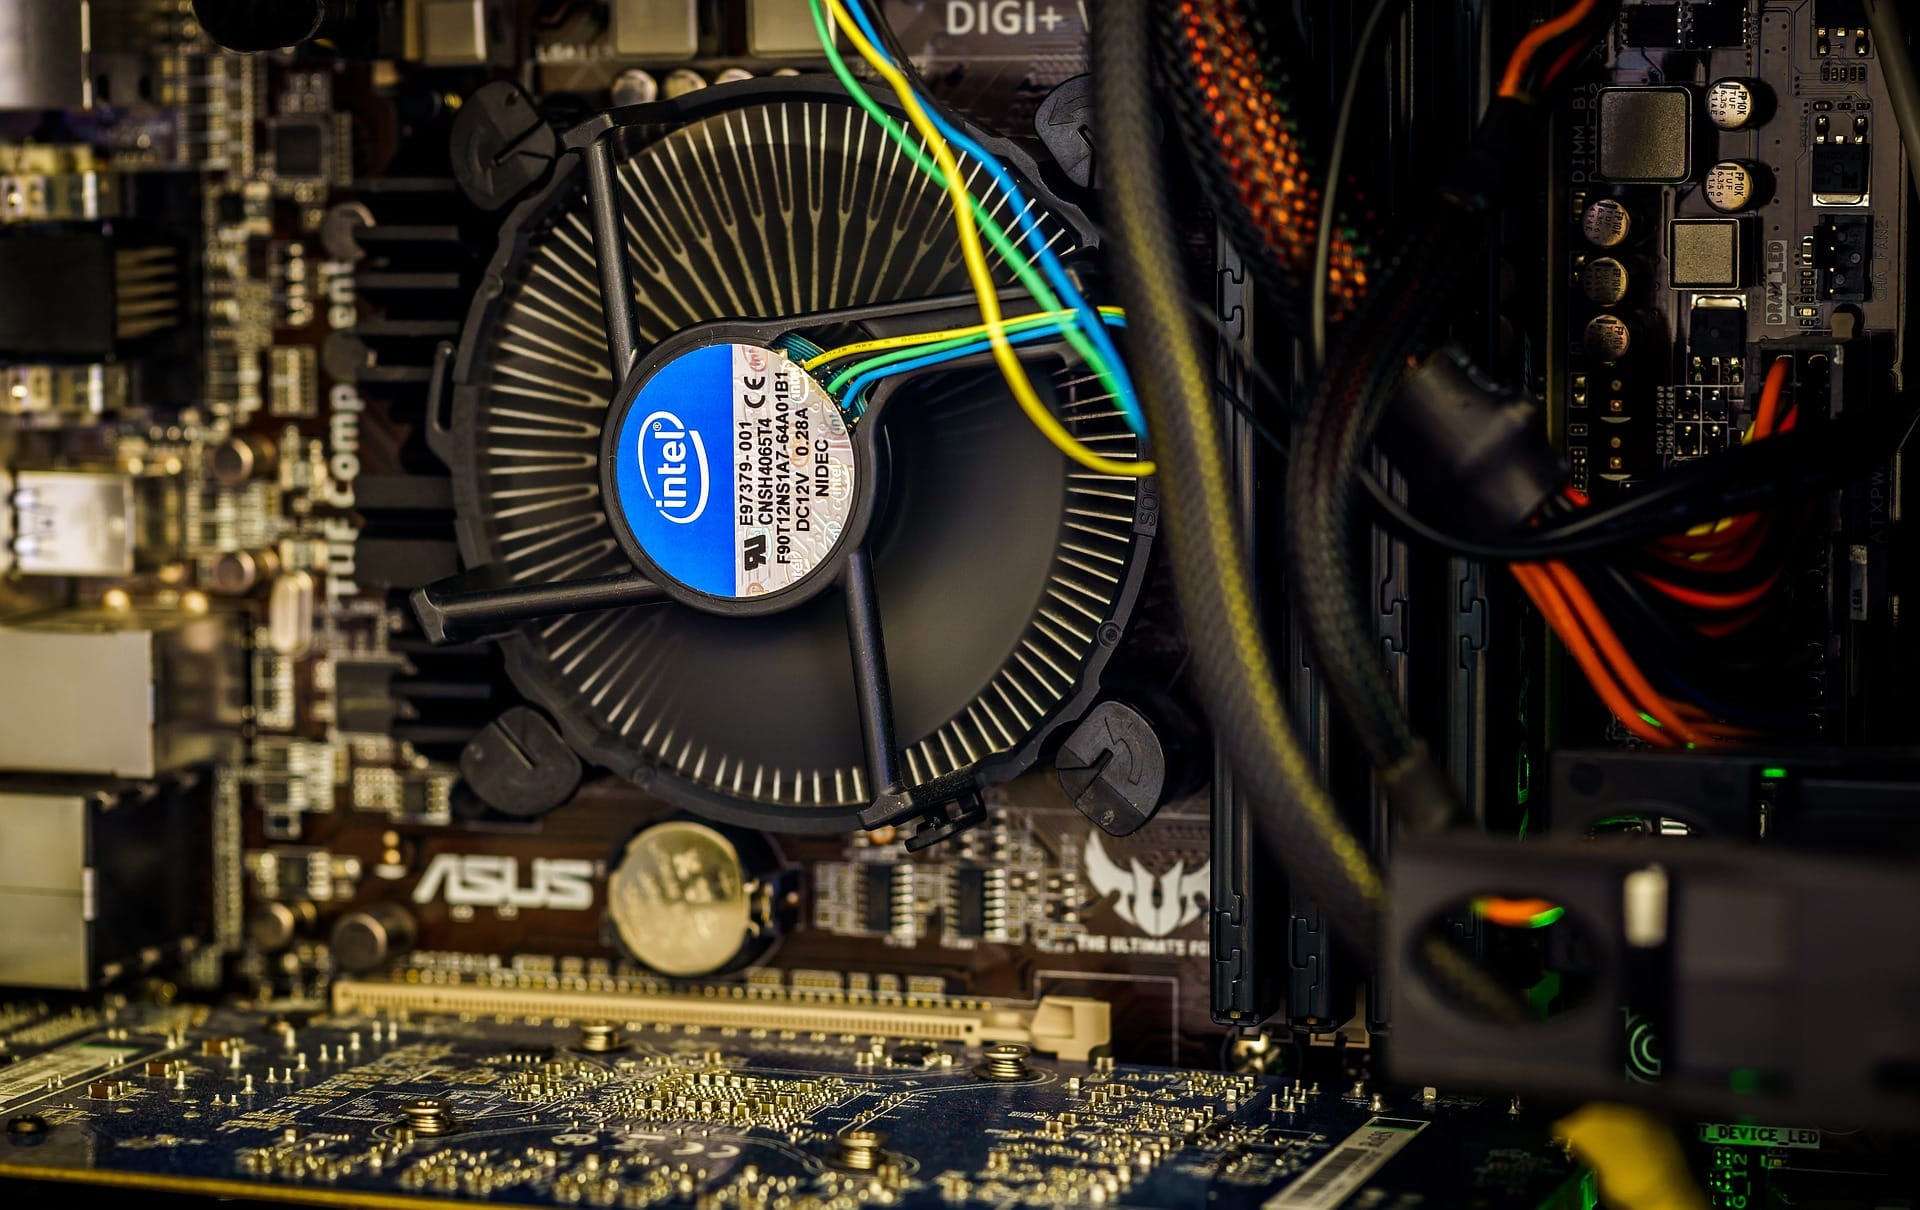 If necessary, clean the cooling fans to remove any accumulated dust or debris.
Avoid running print-intensive tasks for extended periods to prevent overheating.